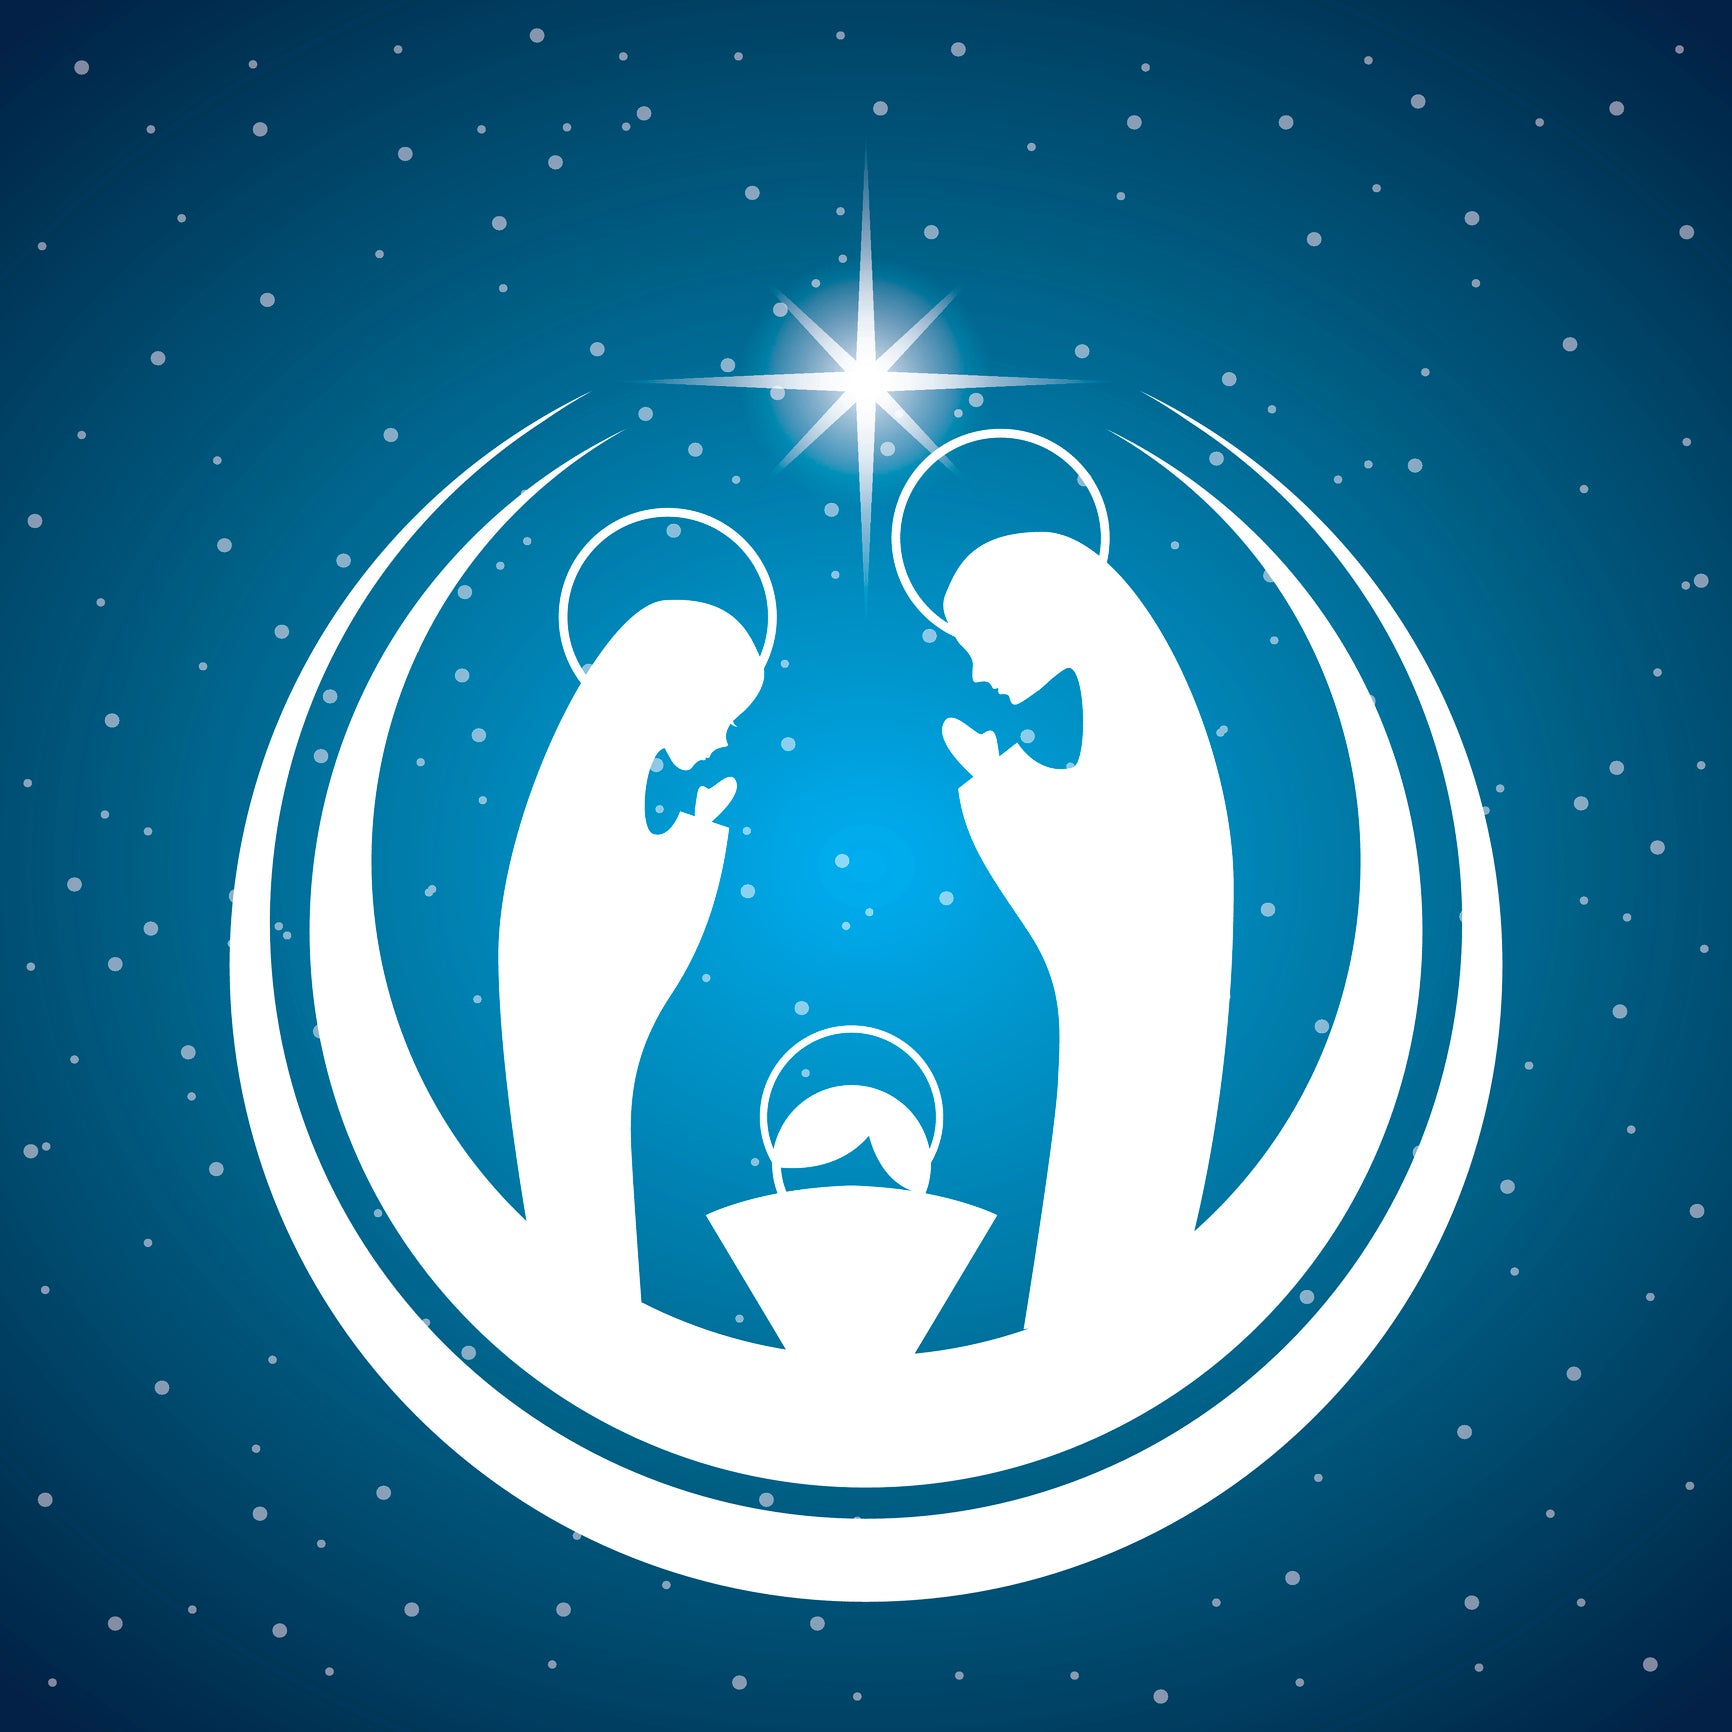 Praying Mother Mary and Joseph Over Manger in the Stars Vinyl Decal Sticker